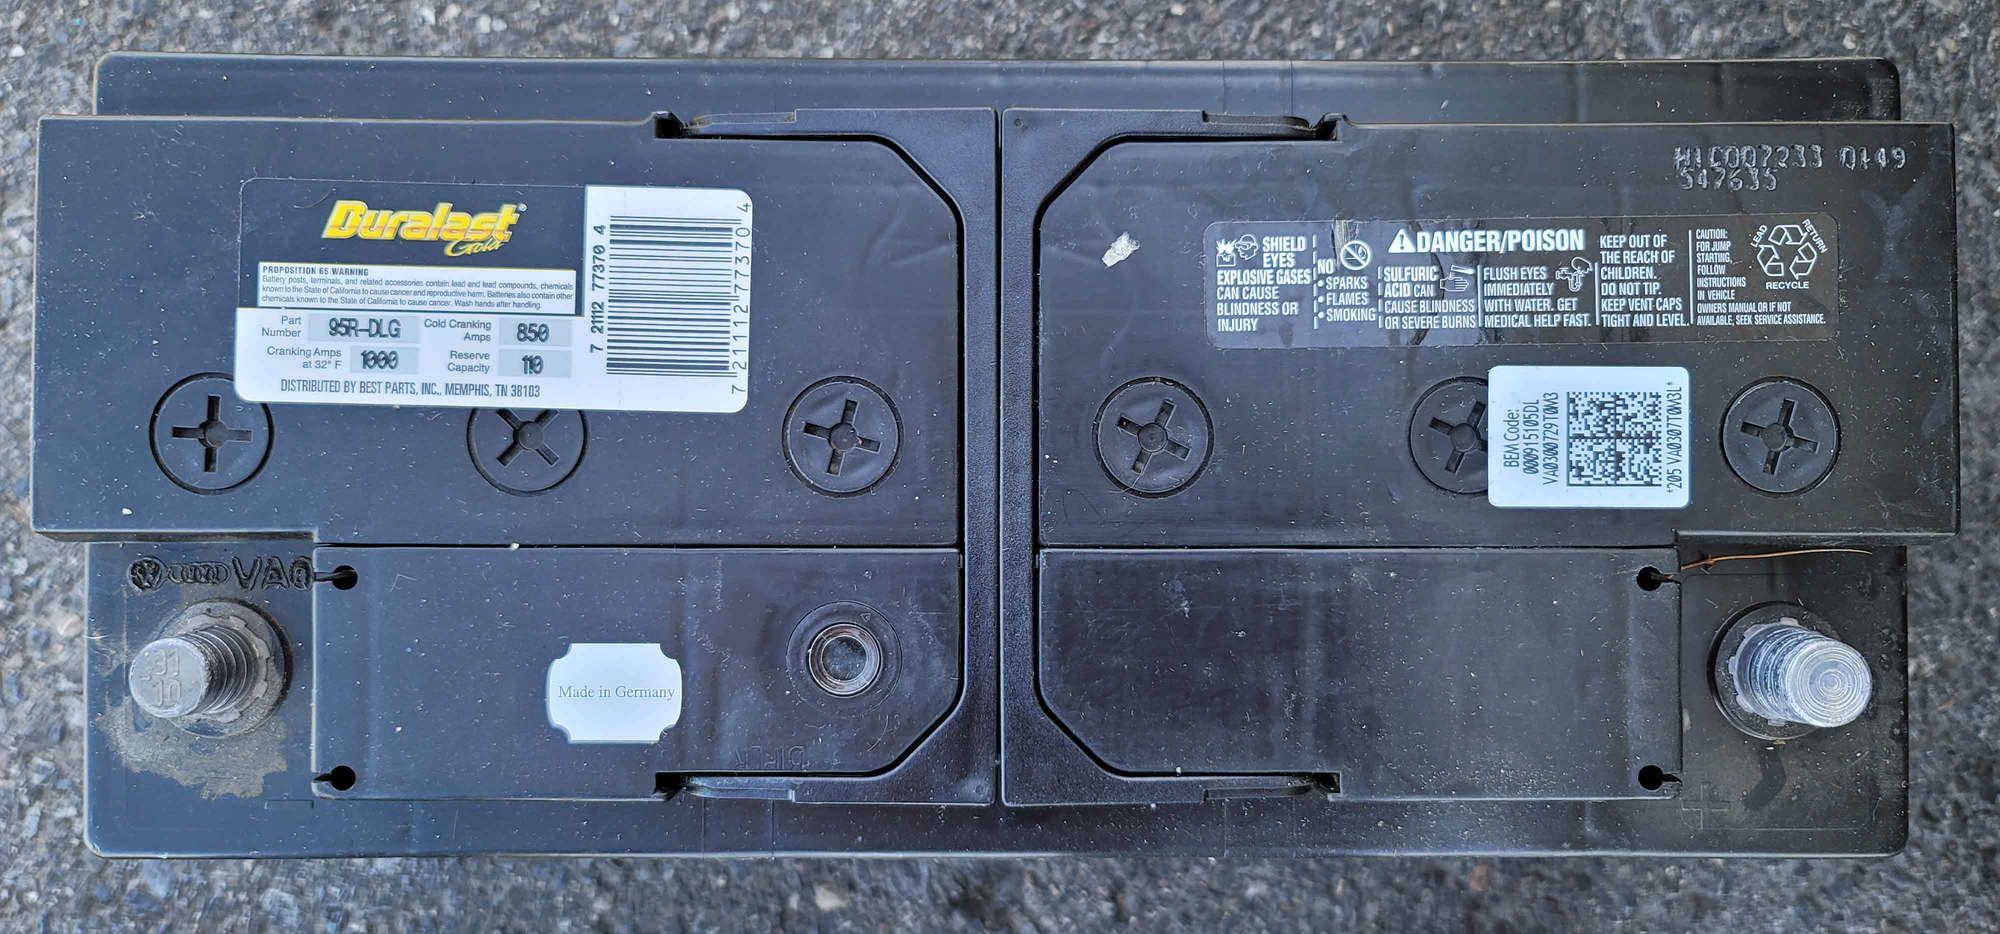 Exact Battery Replacement for BMW OEM Battery - Page 2 -  -  Forums